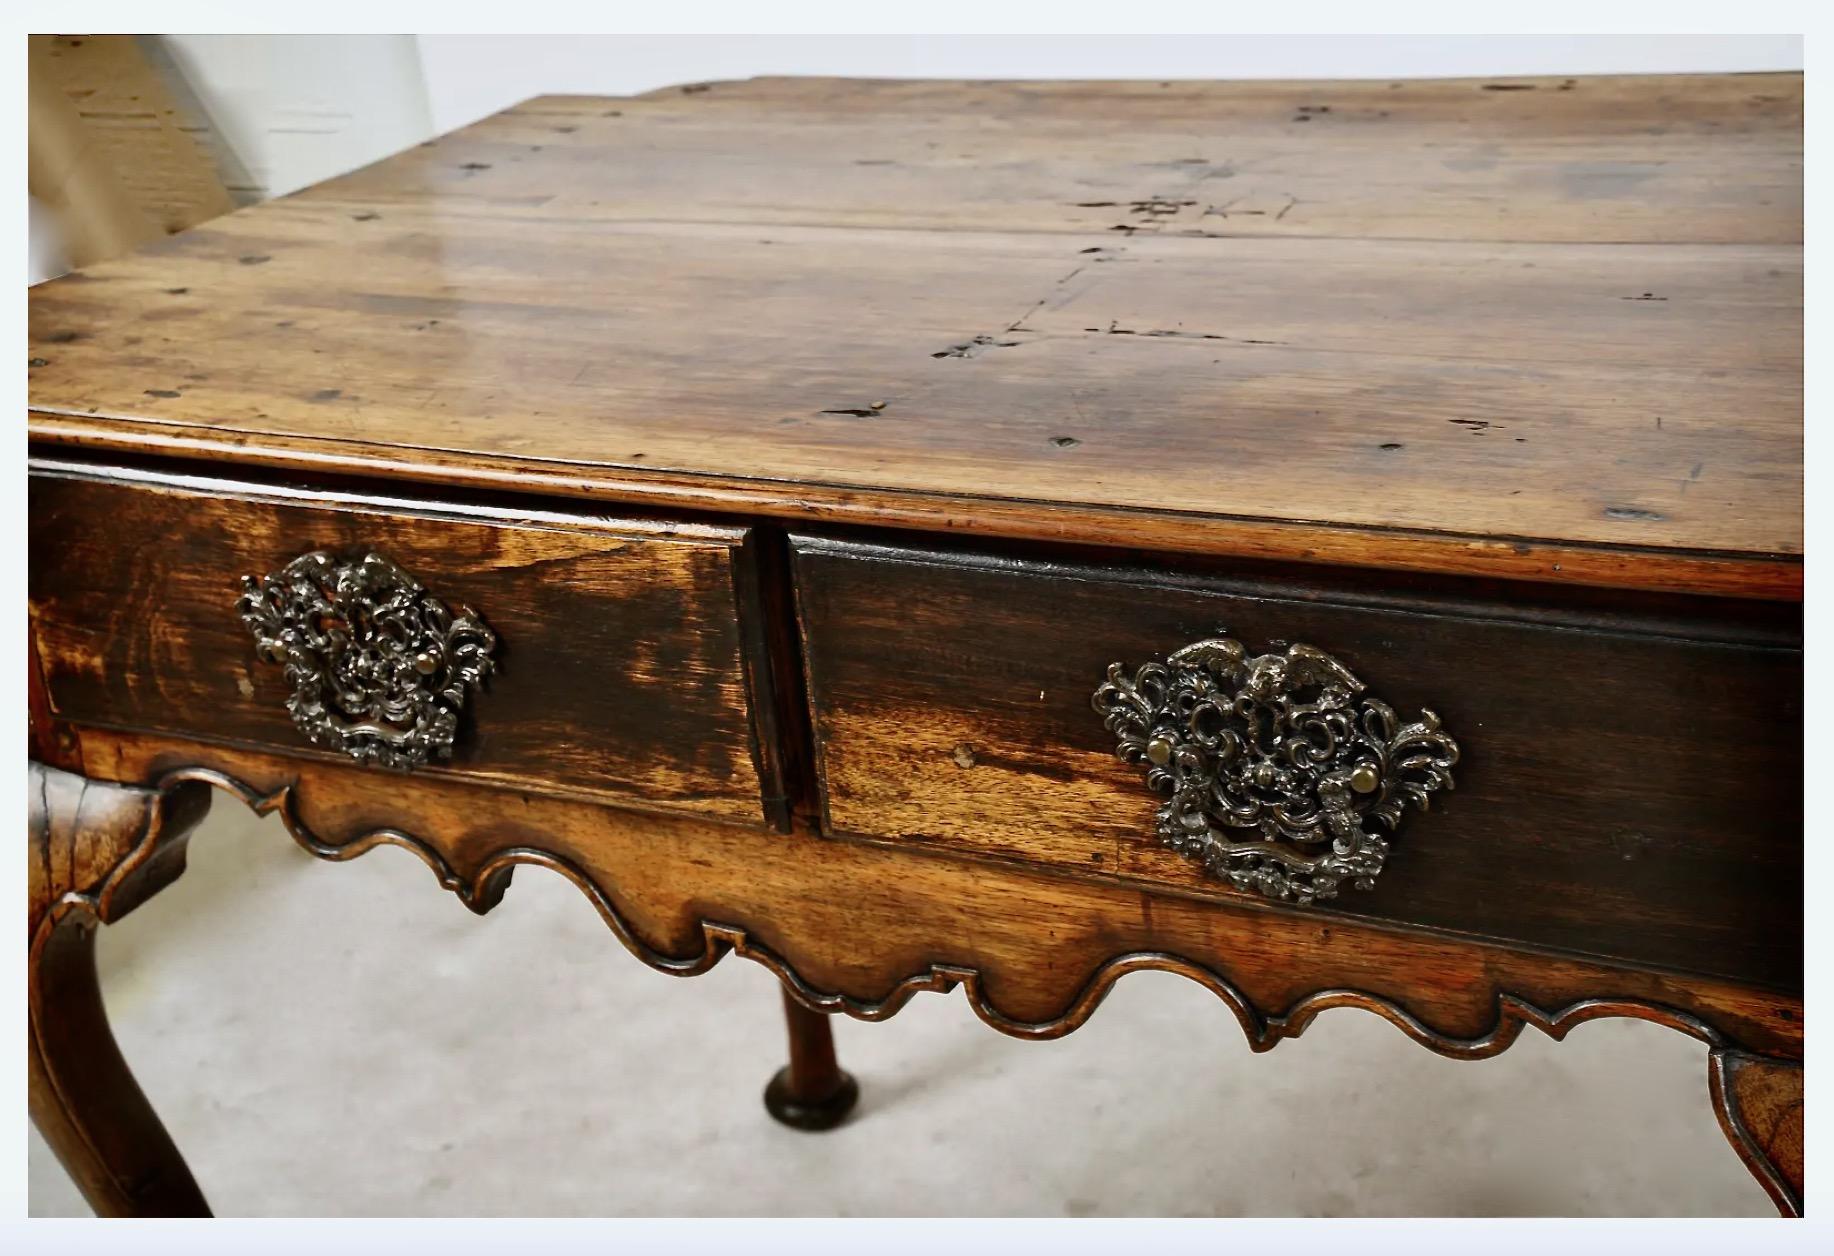 Beautiful 18th century Swedish Rococo two-drawer writing or side table with a finely carved shaped skirt and cabriole legs. The unusual form of the top makes this table a true eye-catcher. Originally ebanized, the table now displays an old waxed and